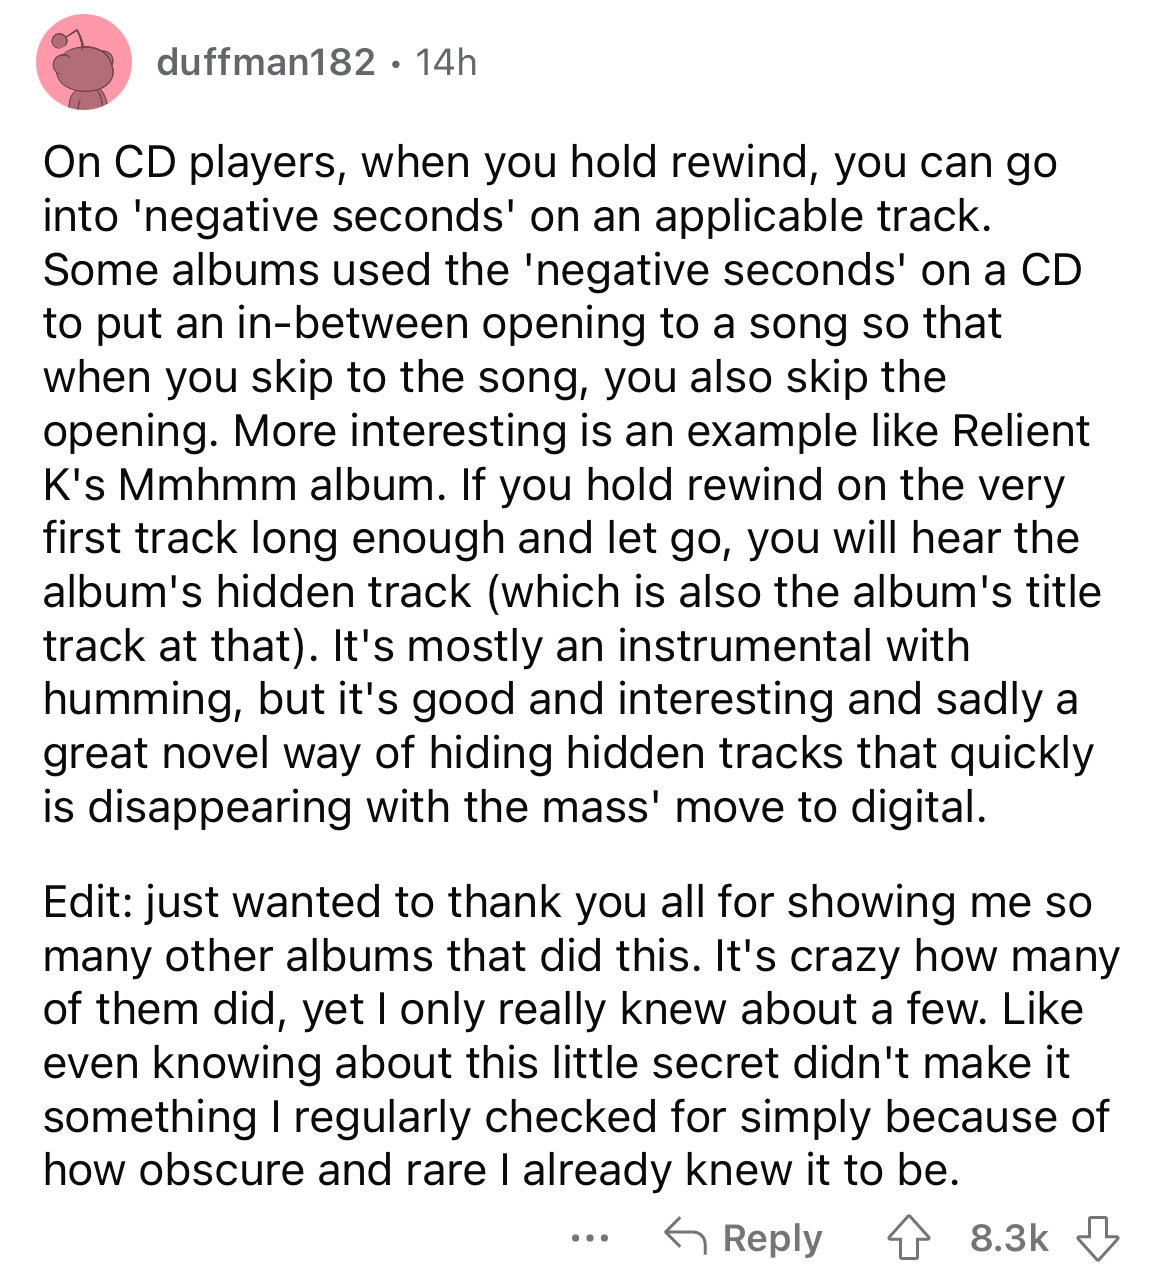 document - duffman182 14h On Cd players, when you hold rewind, you can go into 'negative seconds' on an applicable track. Some albums used the 'negative seconds' on a Cd to put an inbetween opening to a song so that when you skip to the song, you also ski